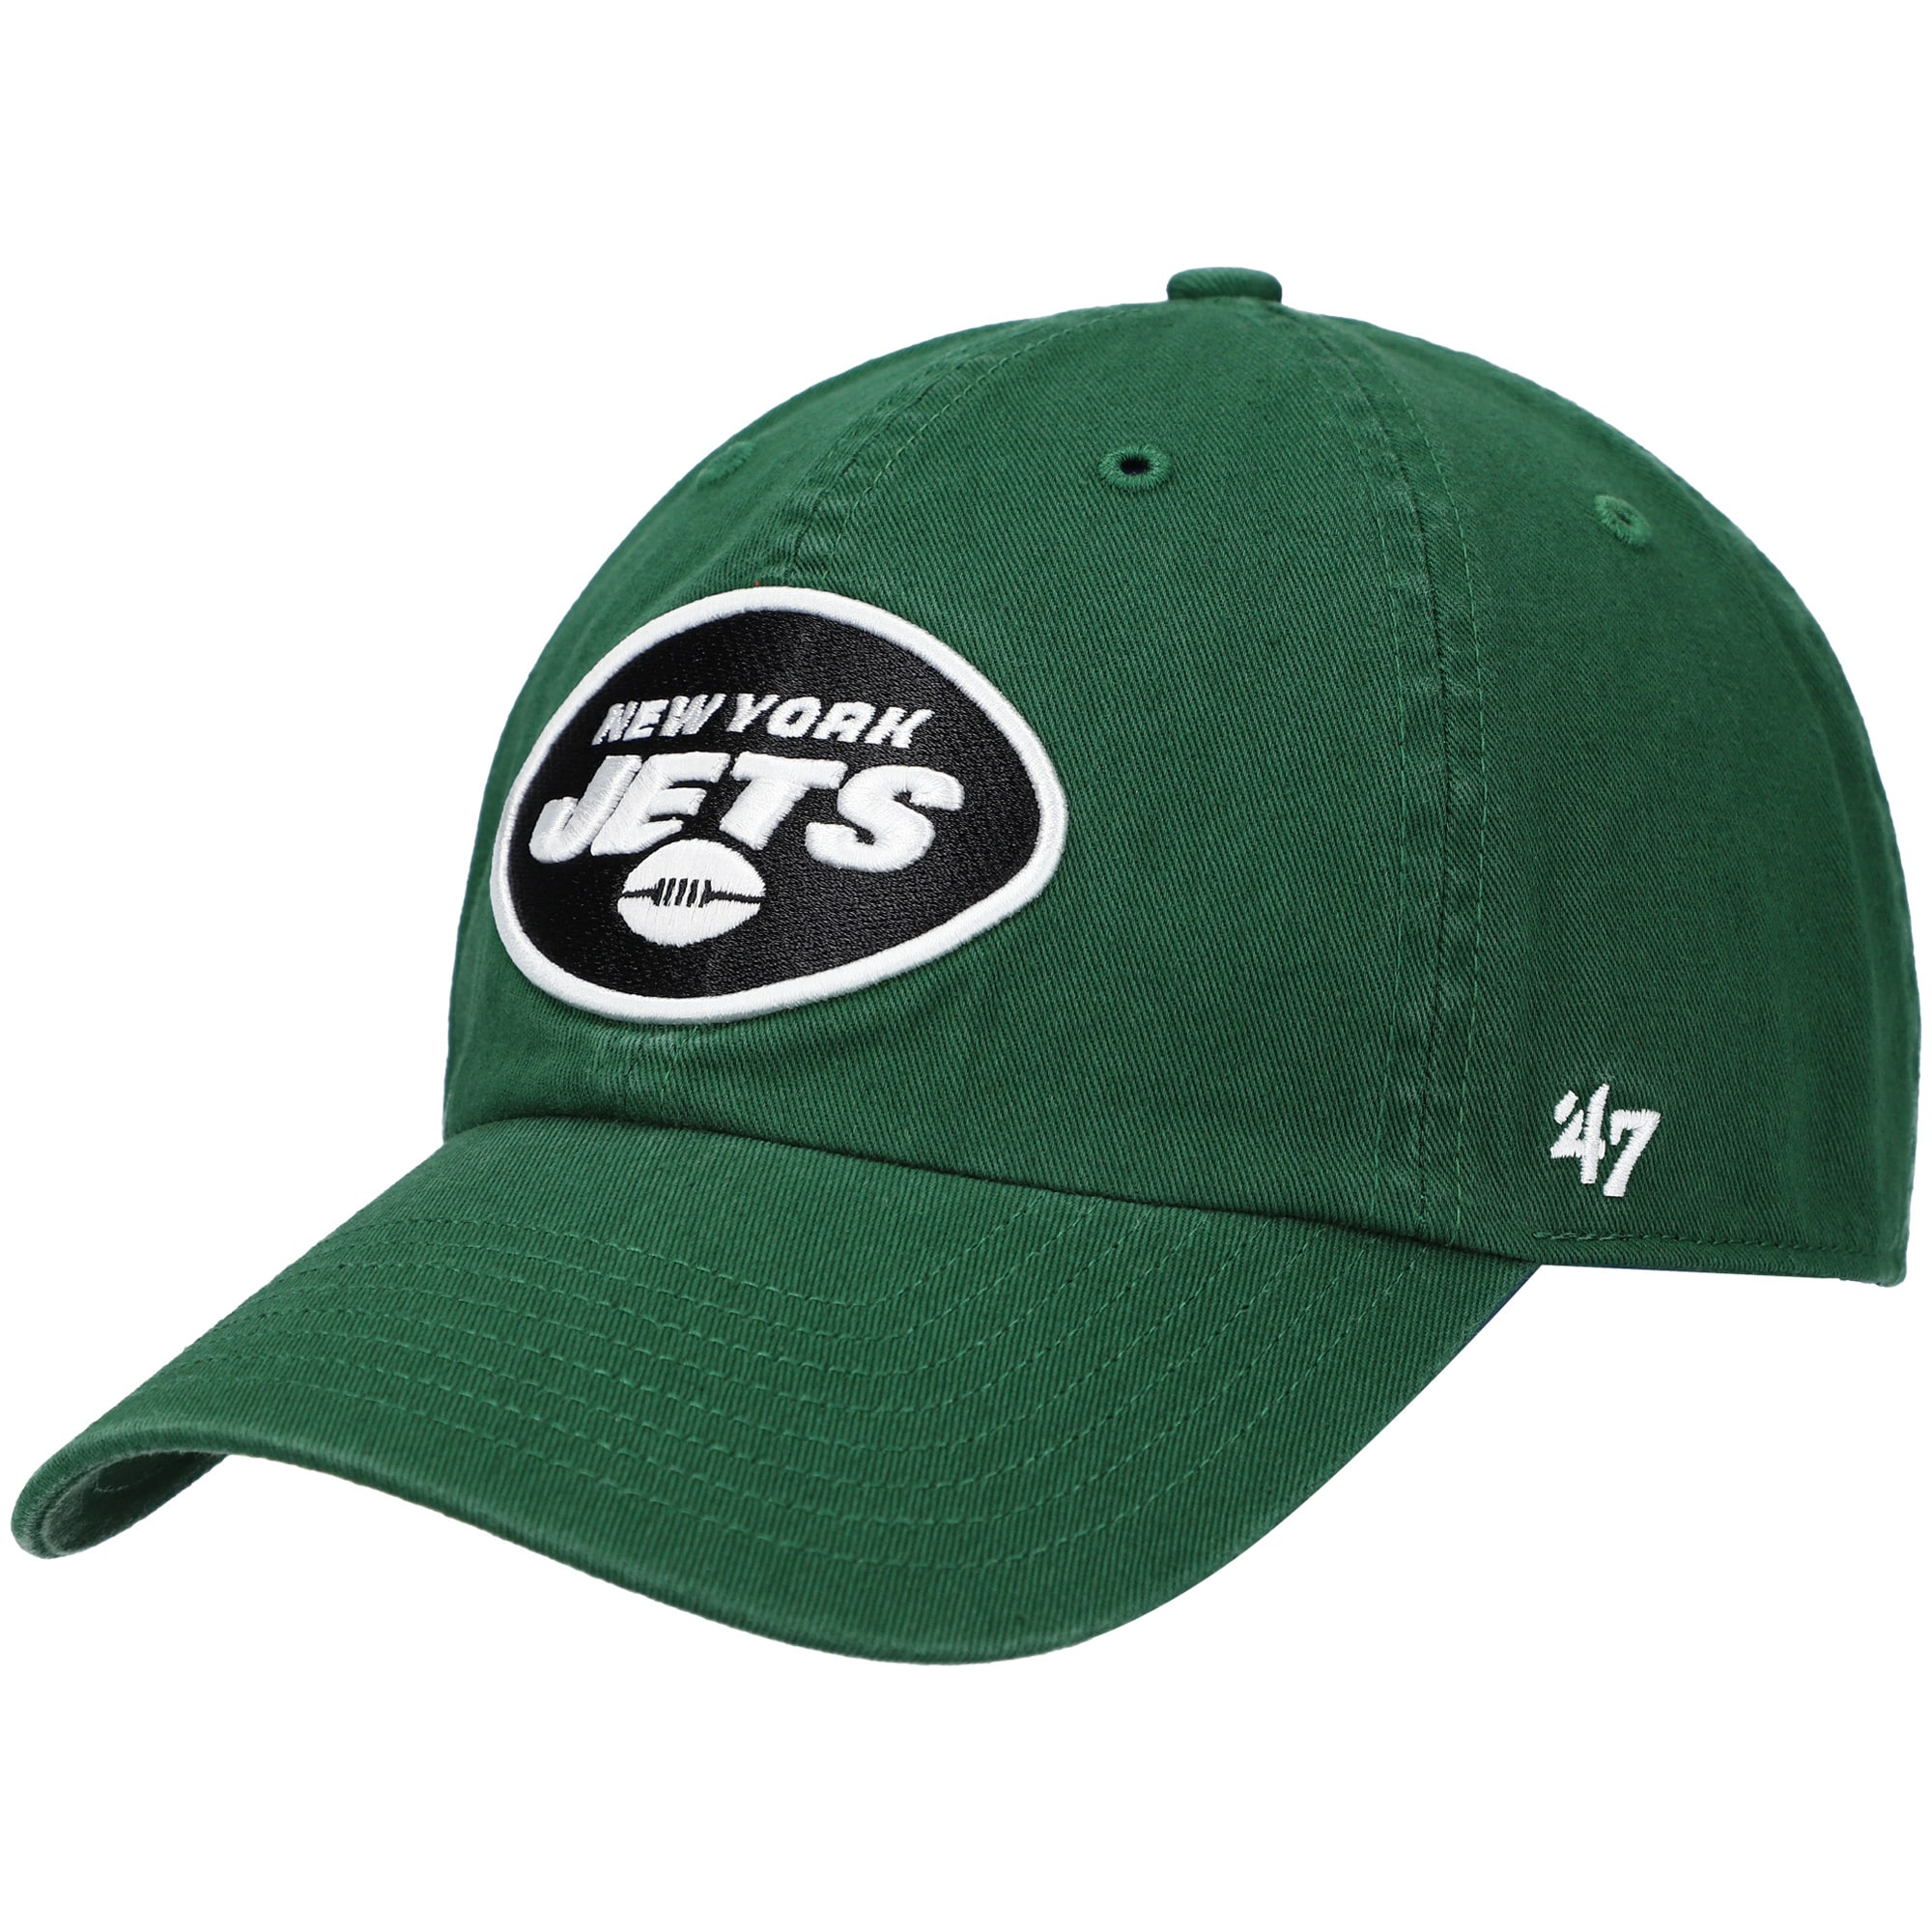 Buy New York Jets '47 Primary Clean Up Adjustable Hat - Green 